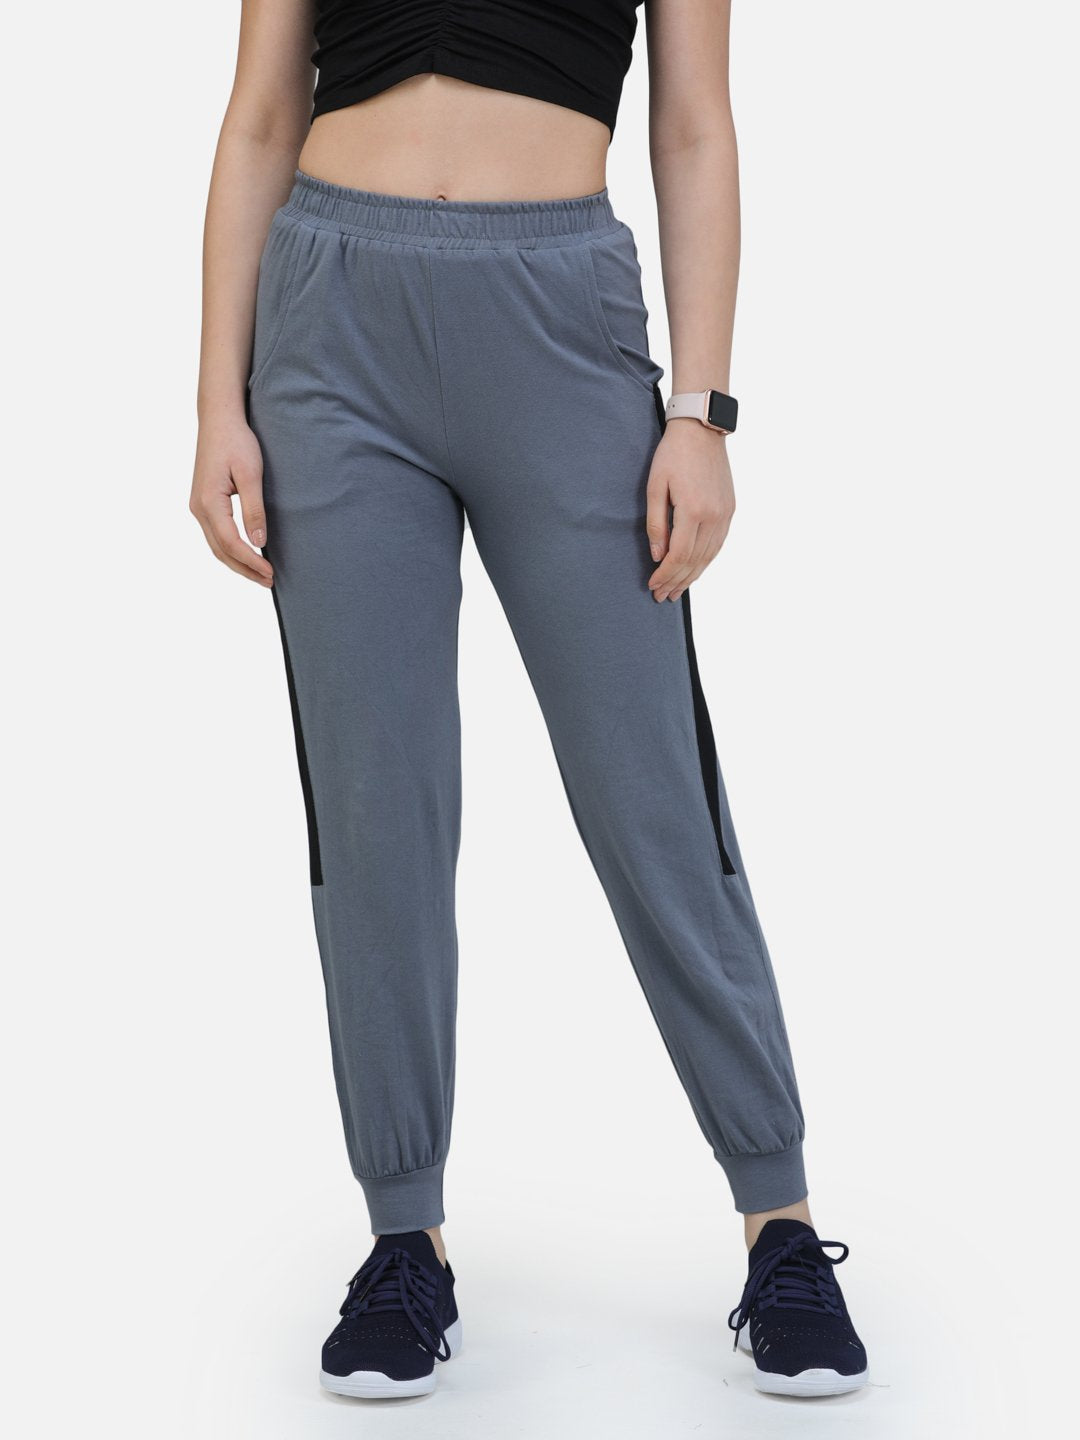 SCORPIUS GREY TRACKPANT WITH BLACK STRIPES